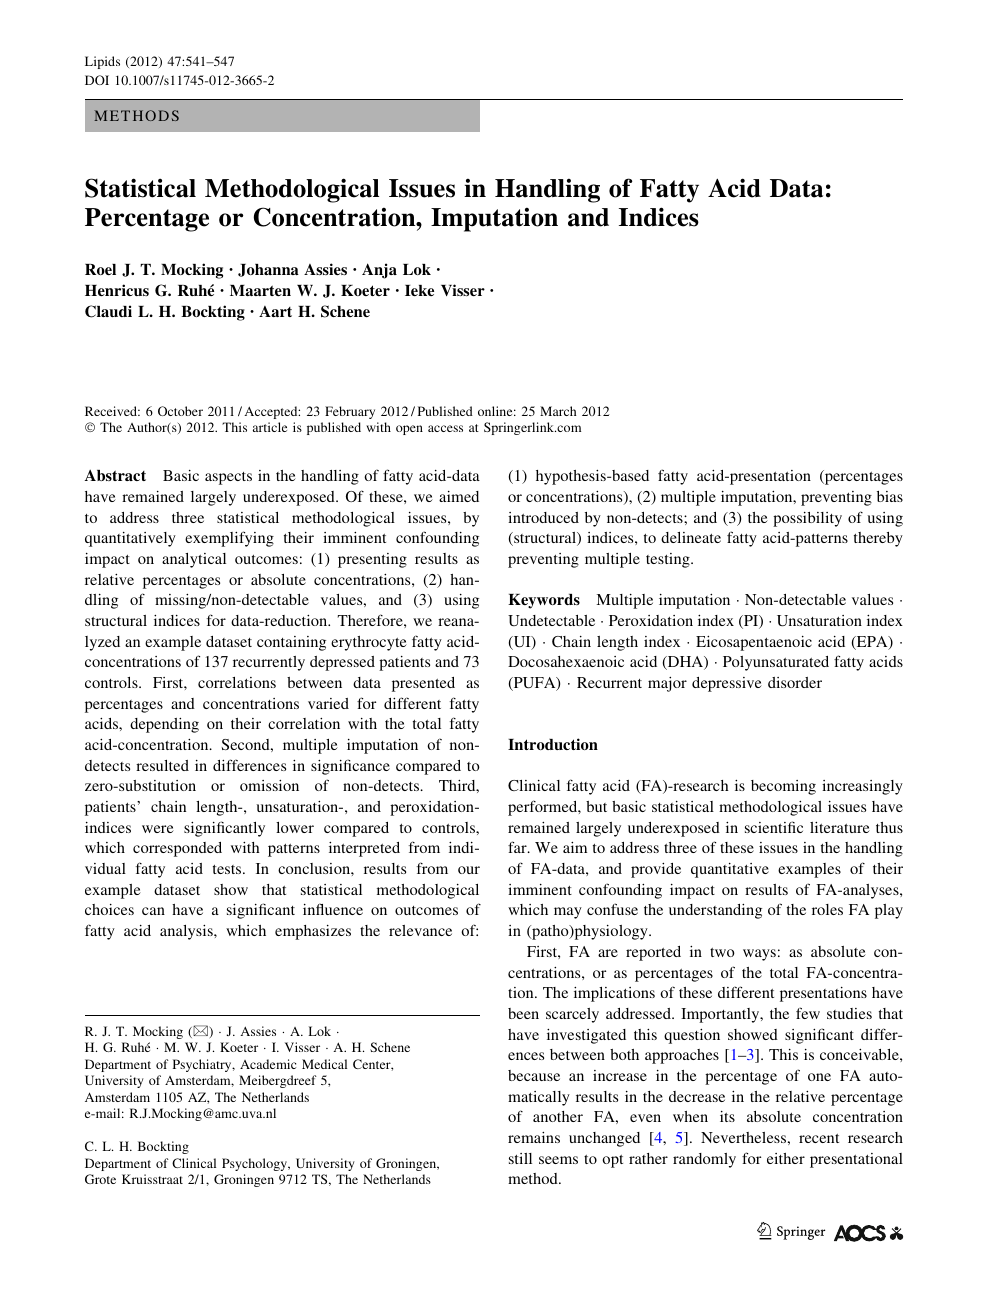 Statistical Methodological Issues In Handling Of Fatty Acid Data Percentage Or Concentration Imputation And Indices Topic Of Research Paper In Health Sciences Download Scholarly Article Pdf And Read For Free On